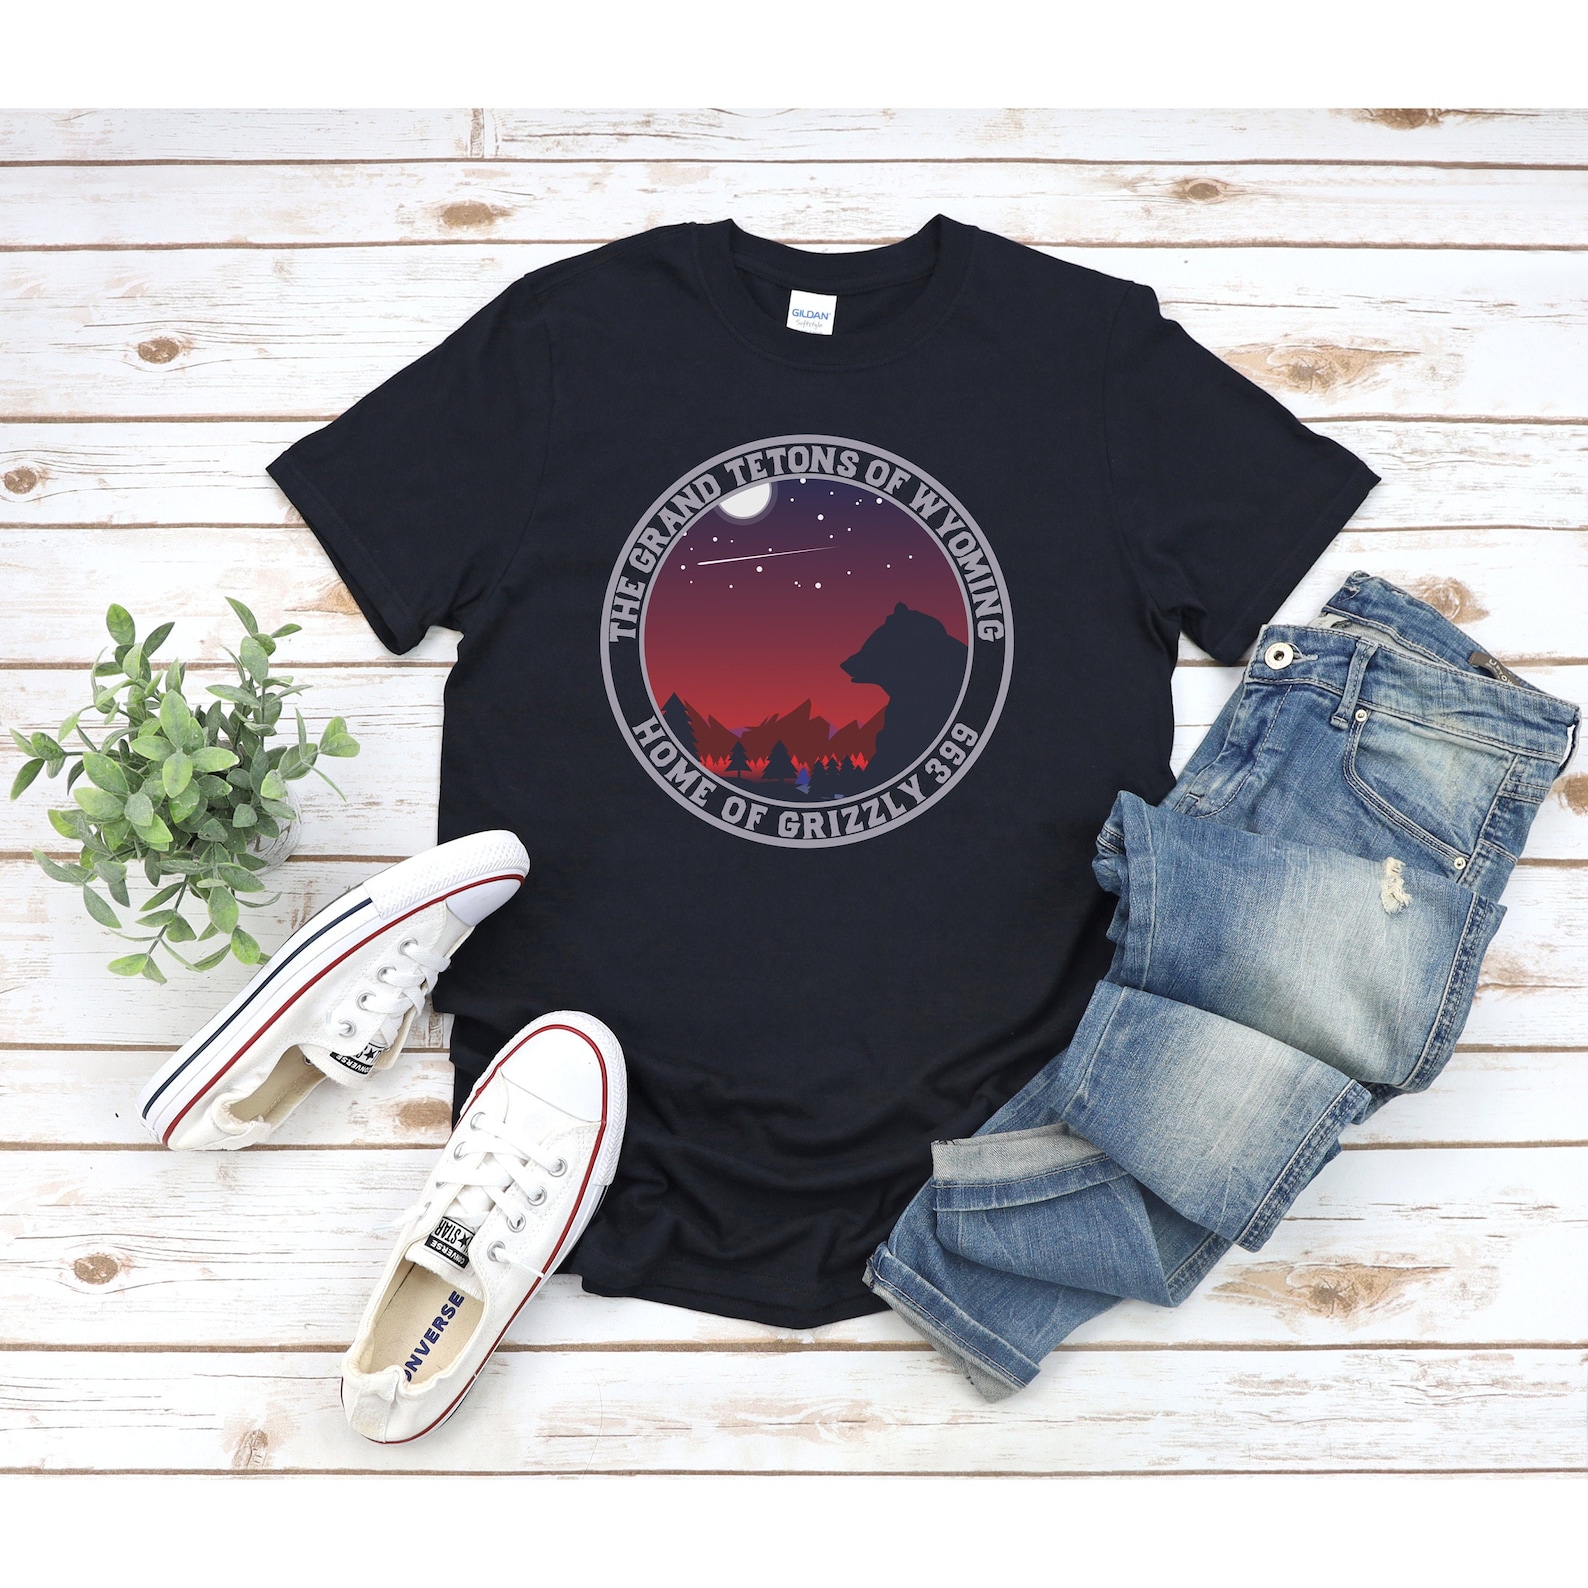 Grand Tetons 399 Shirt Grizzly 399 Shirt Grizzly Bear 399 - Etsy